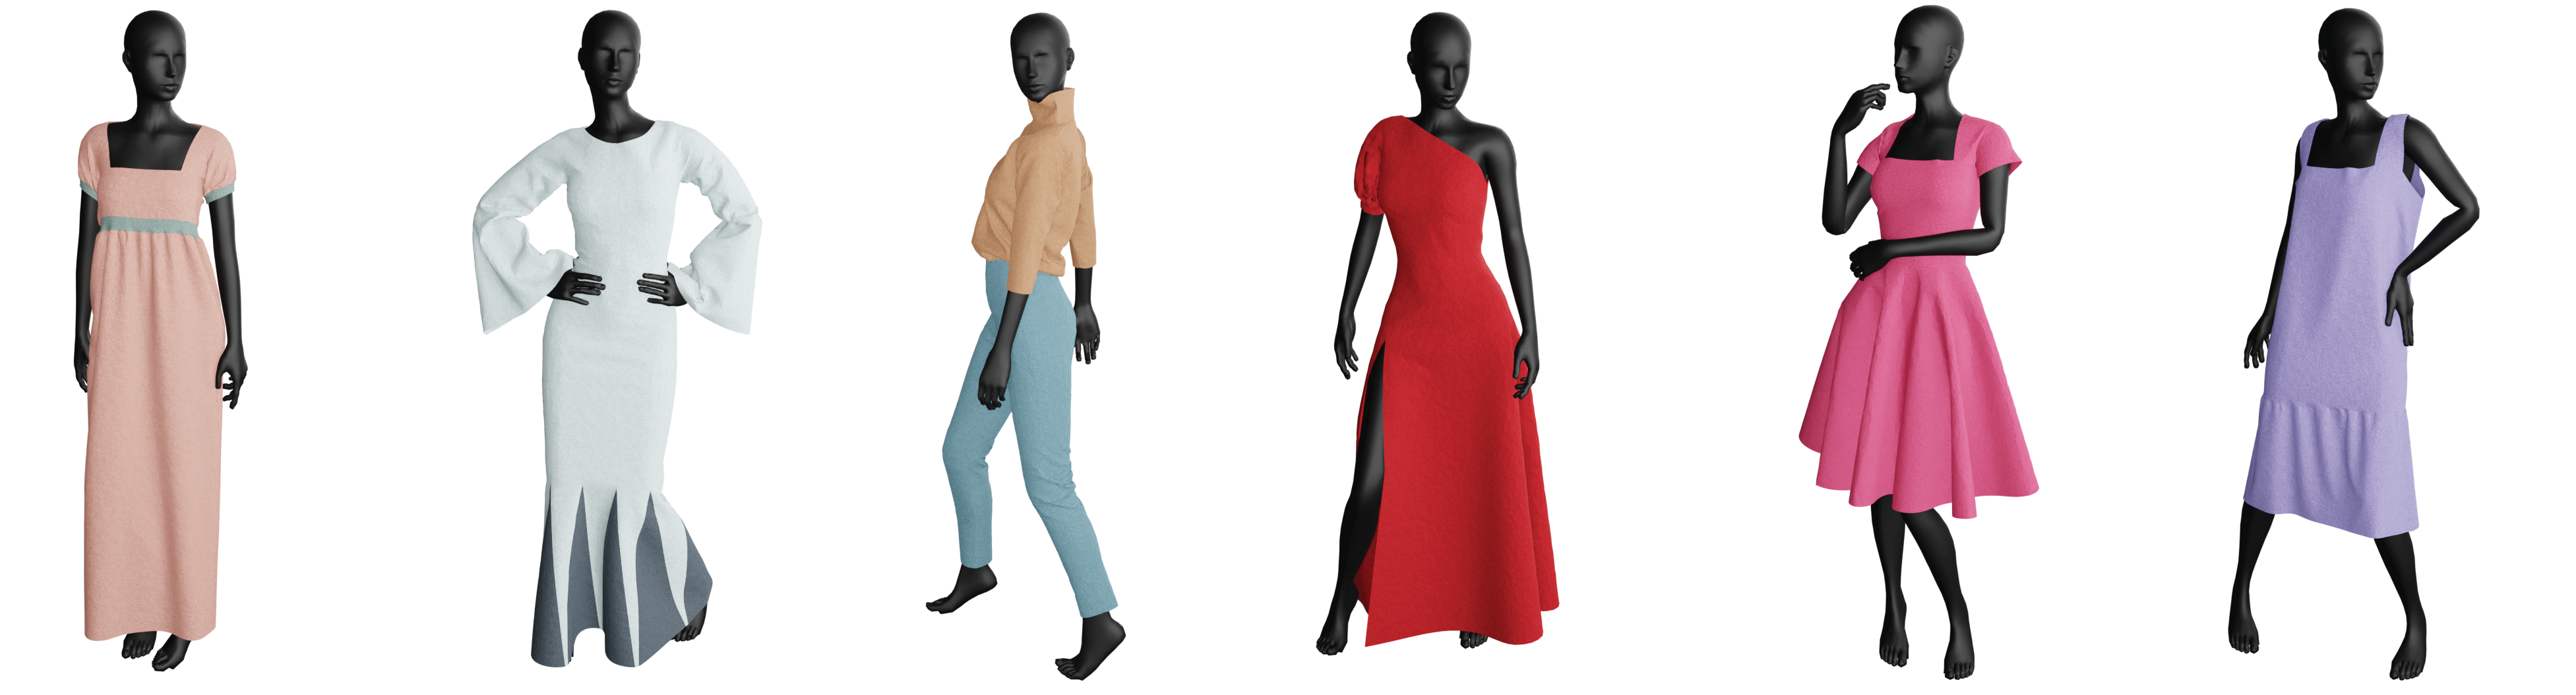 Examples of garments sampled from GarmentCode configurator